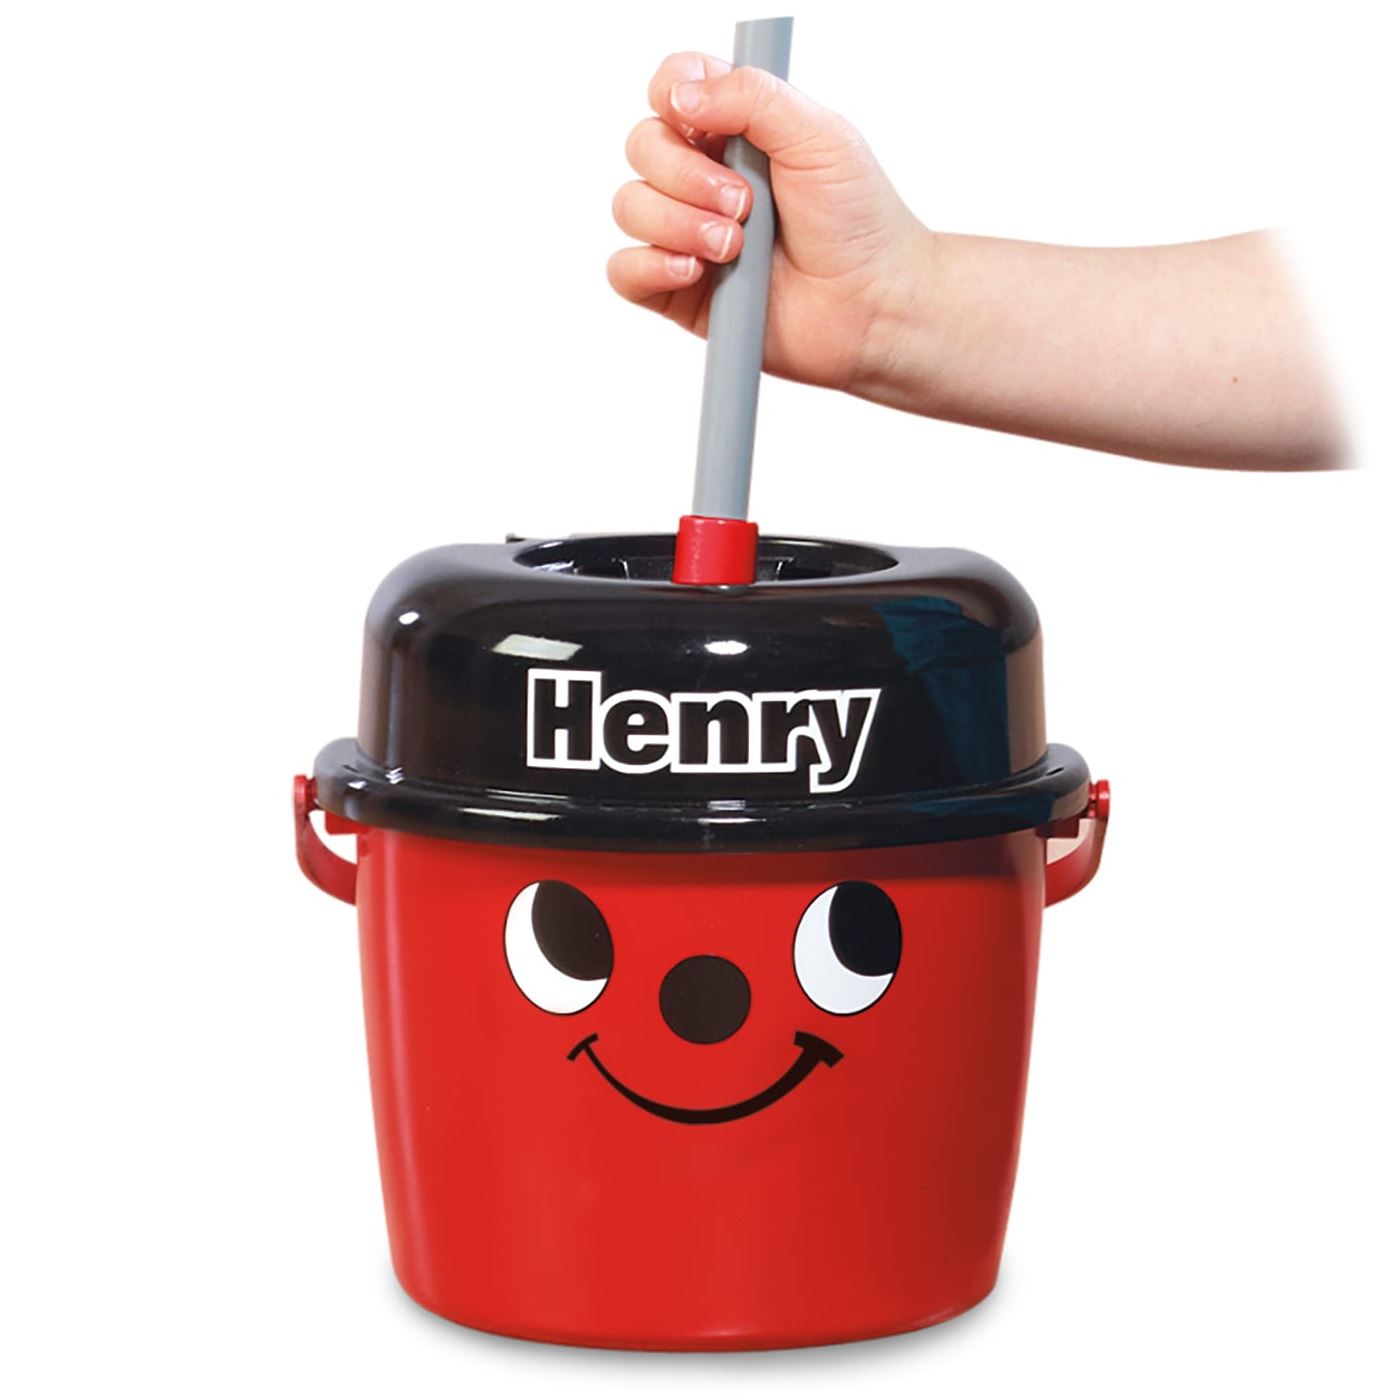 Henry Mop and Bucket Toy